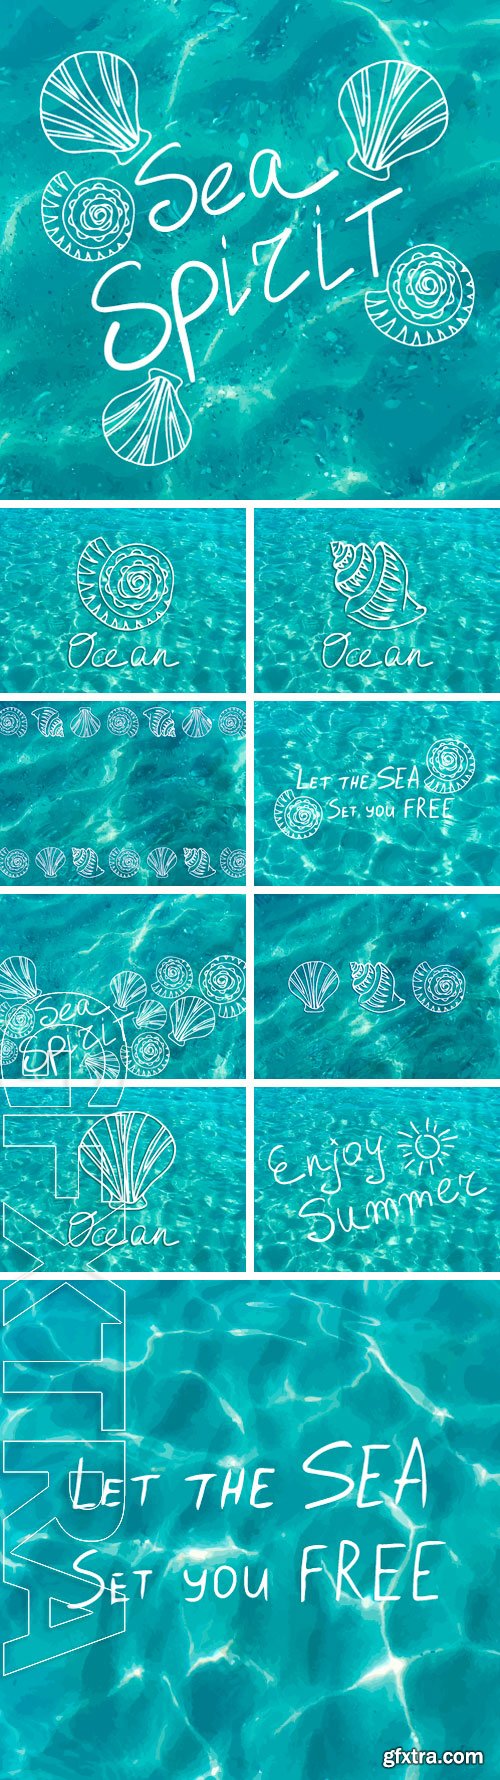 Stock Vectors - Vector shiny blue ocean realistic water with shells. Sea spirit. surface textures, summer posters, trip and vacations cards design